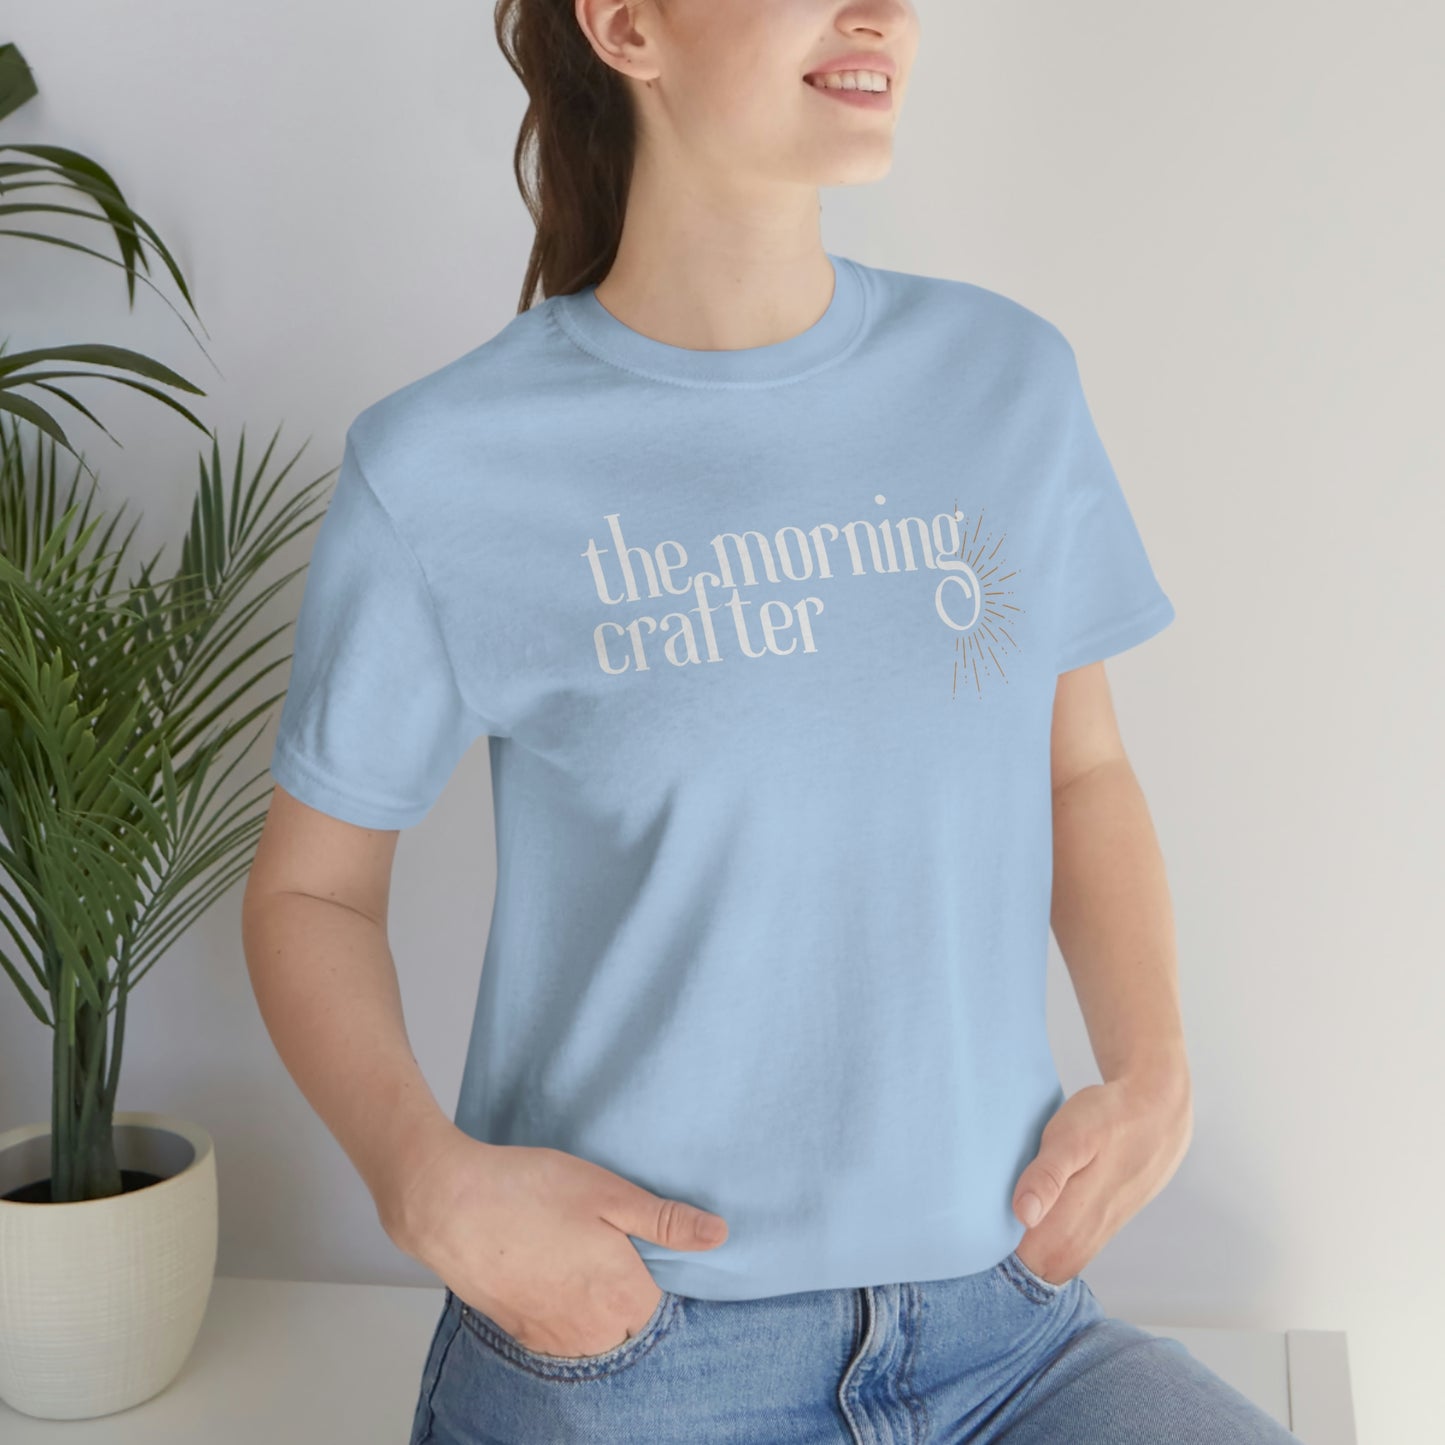 The Morning Crafter- Unisex Jersey Short Sleeve Tee